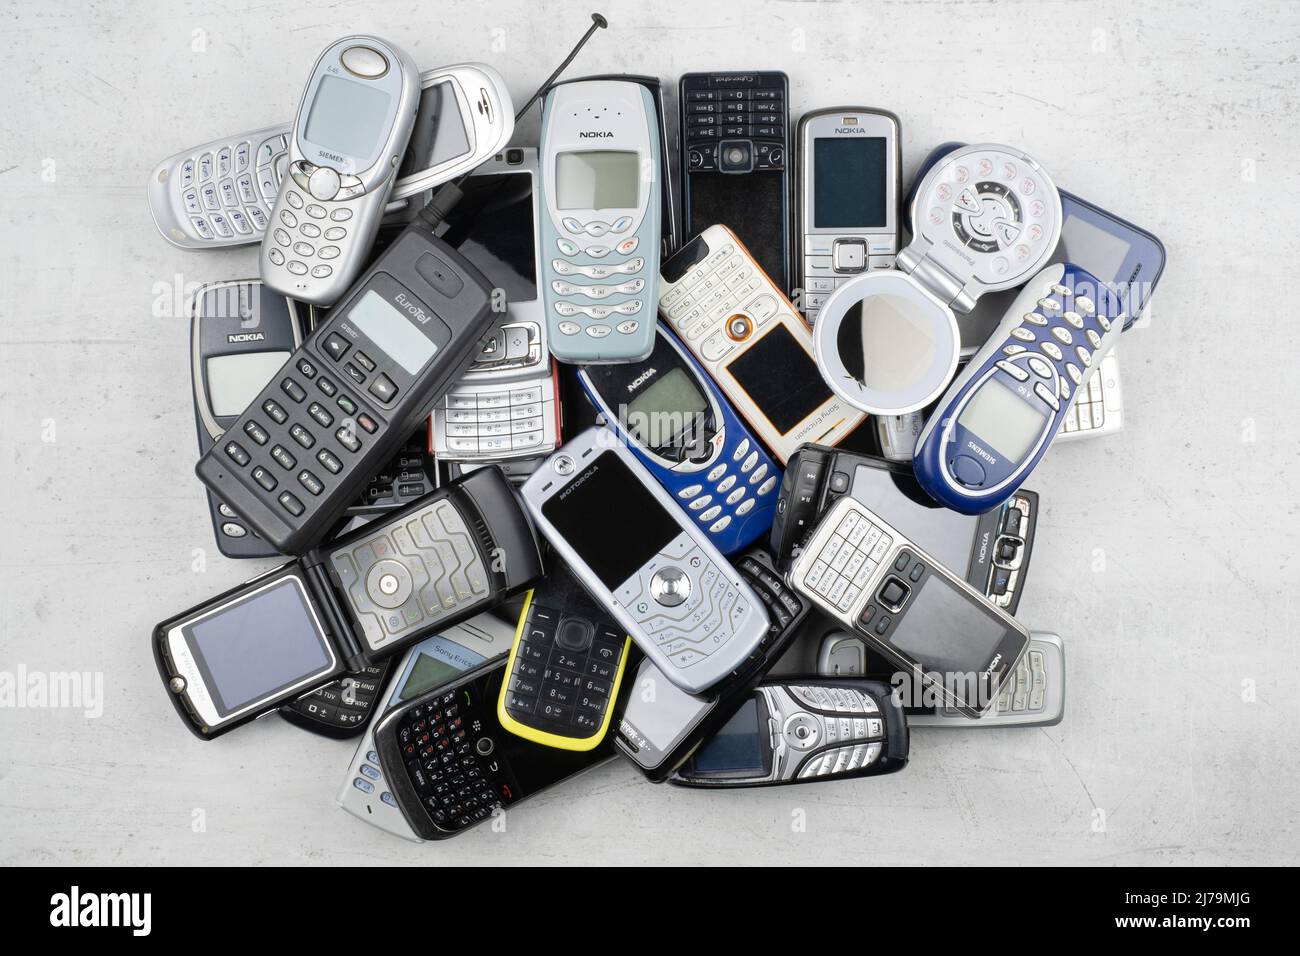 Prague, CZ- 12 December 2021:  Heap of Various brands and generations of old mobile phones gadgets. Editorial Stock Photo